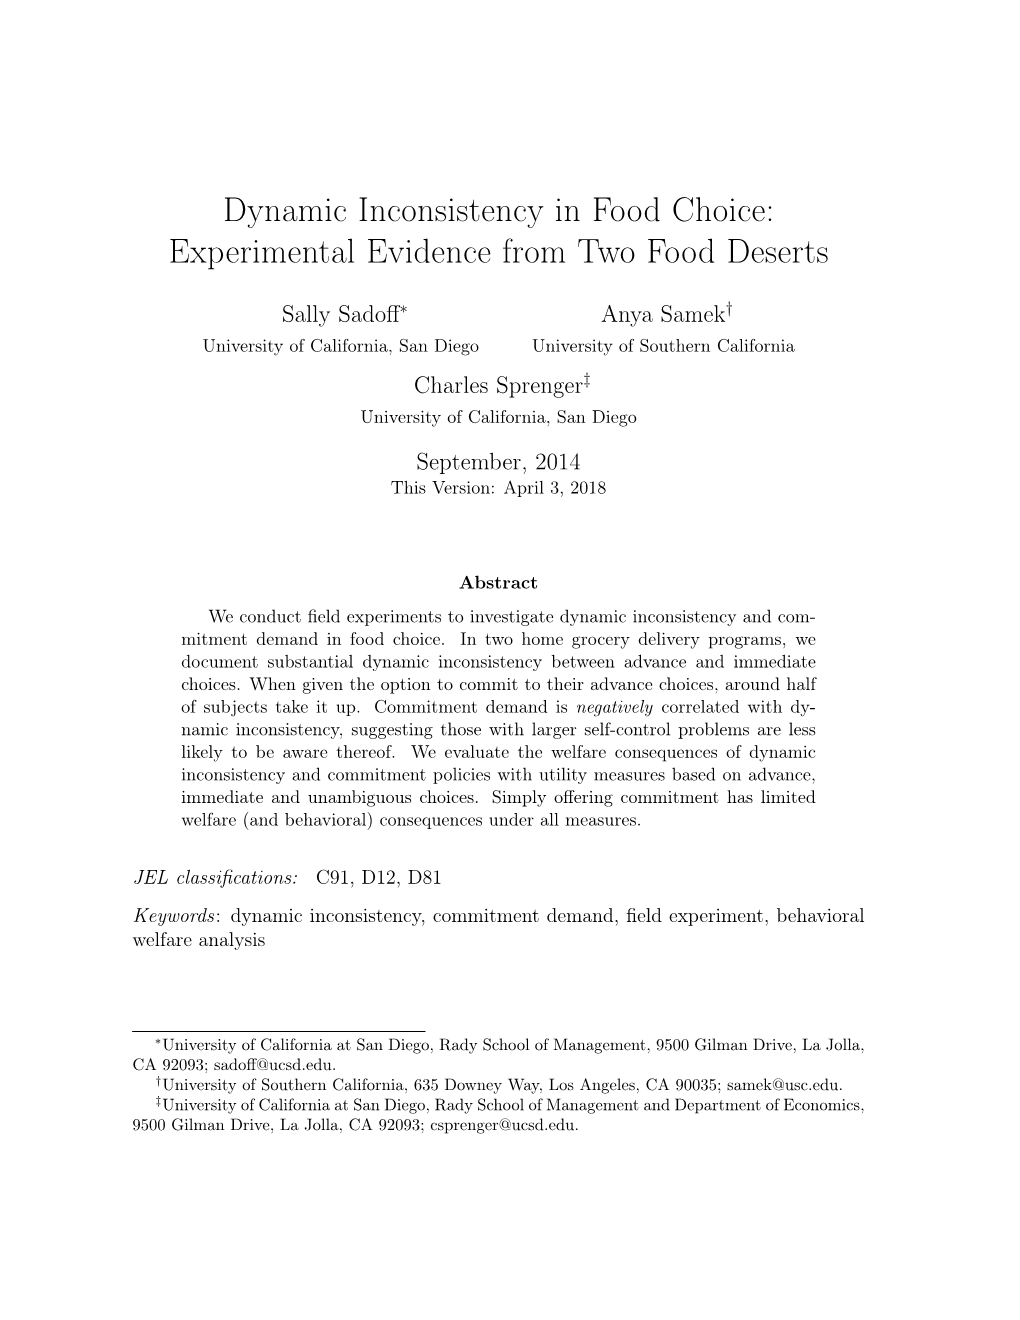 Dynamic Inconsistency in Food Choice: Experimental Evidence from Two Food Deserts